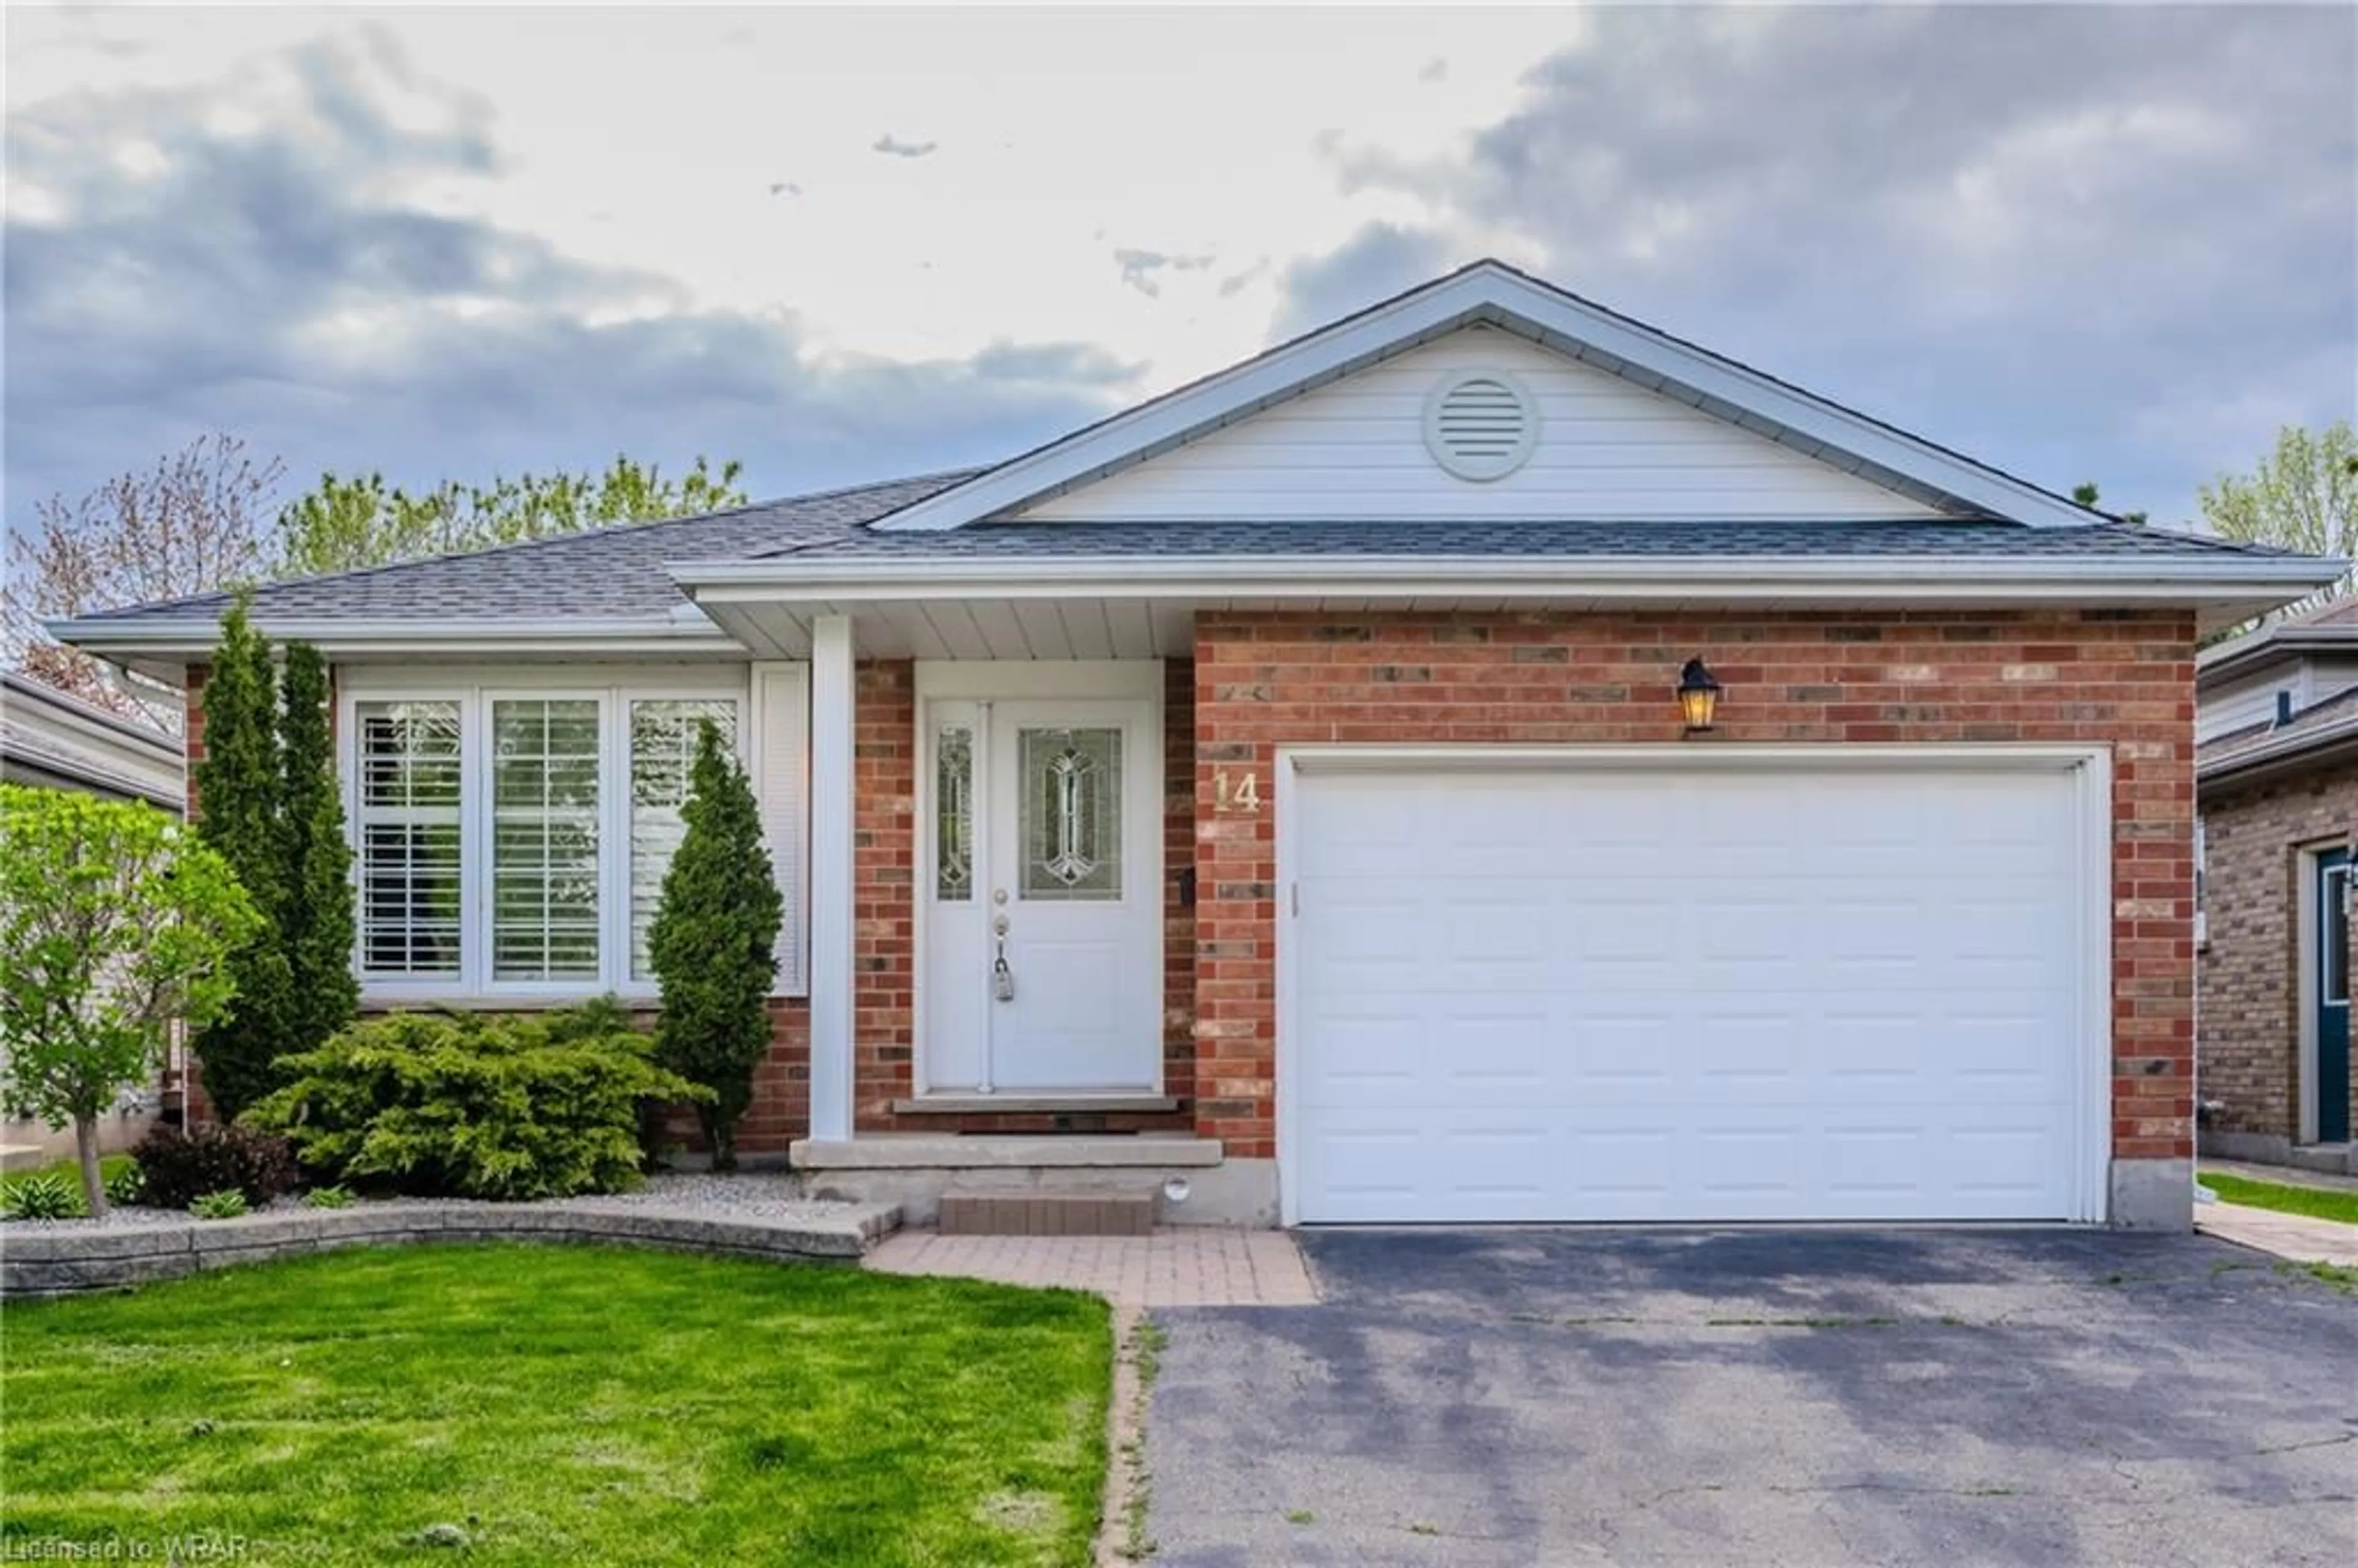 Home with brick exterior material for 14 Tara Cres, Kitchener Ontario N2E 3K9